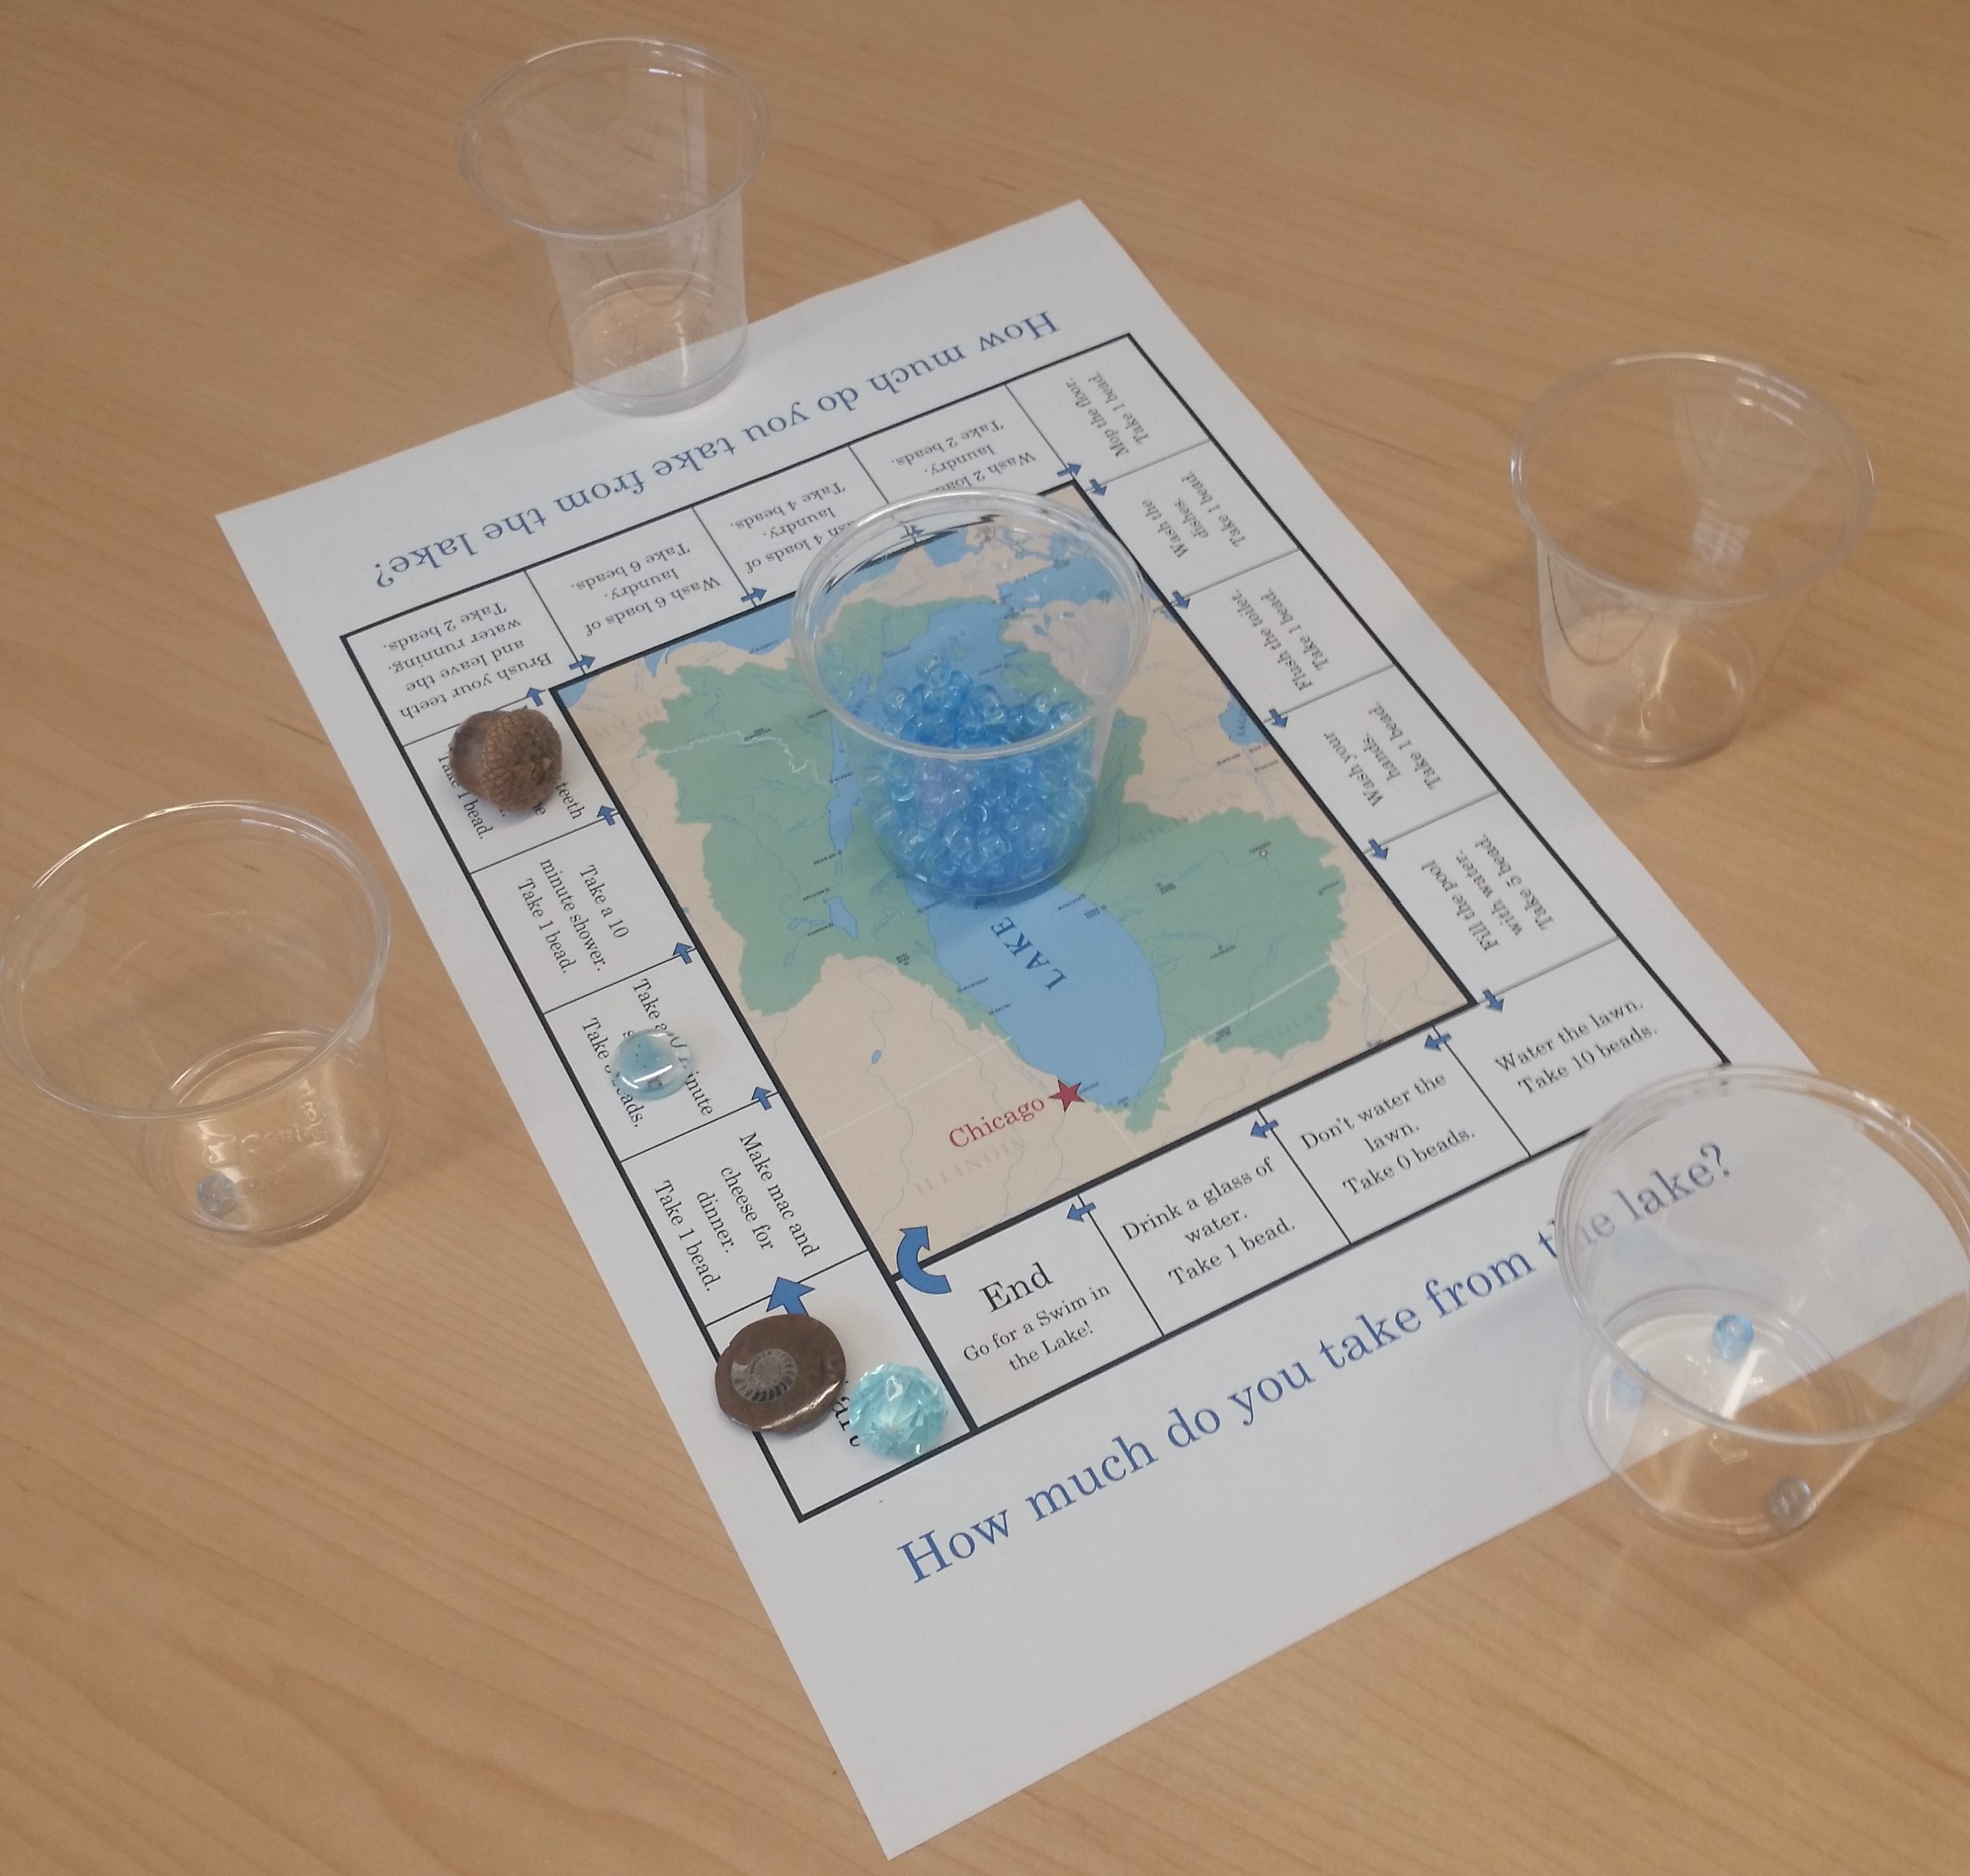 Play a game to learn about water conservation